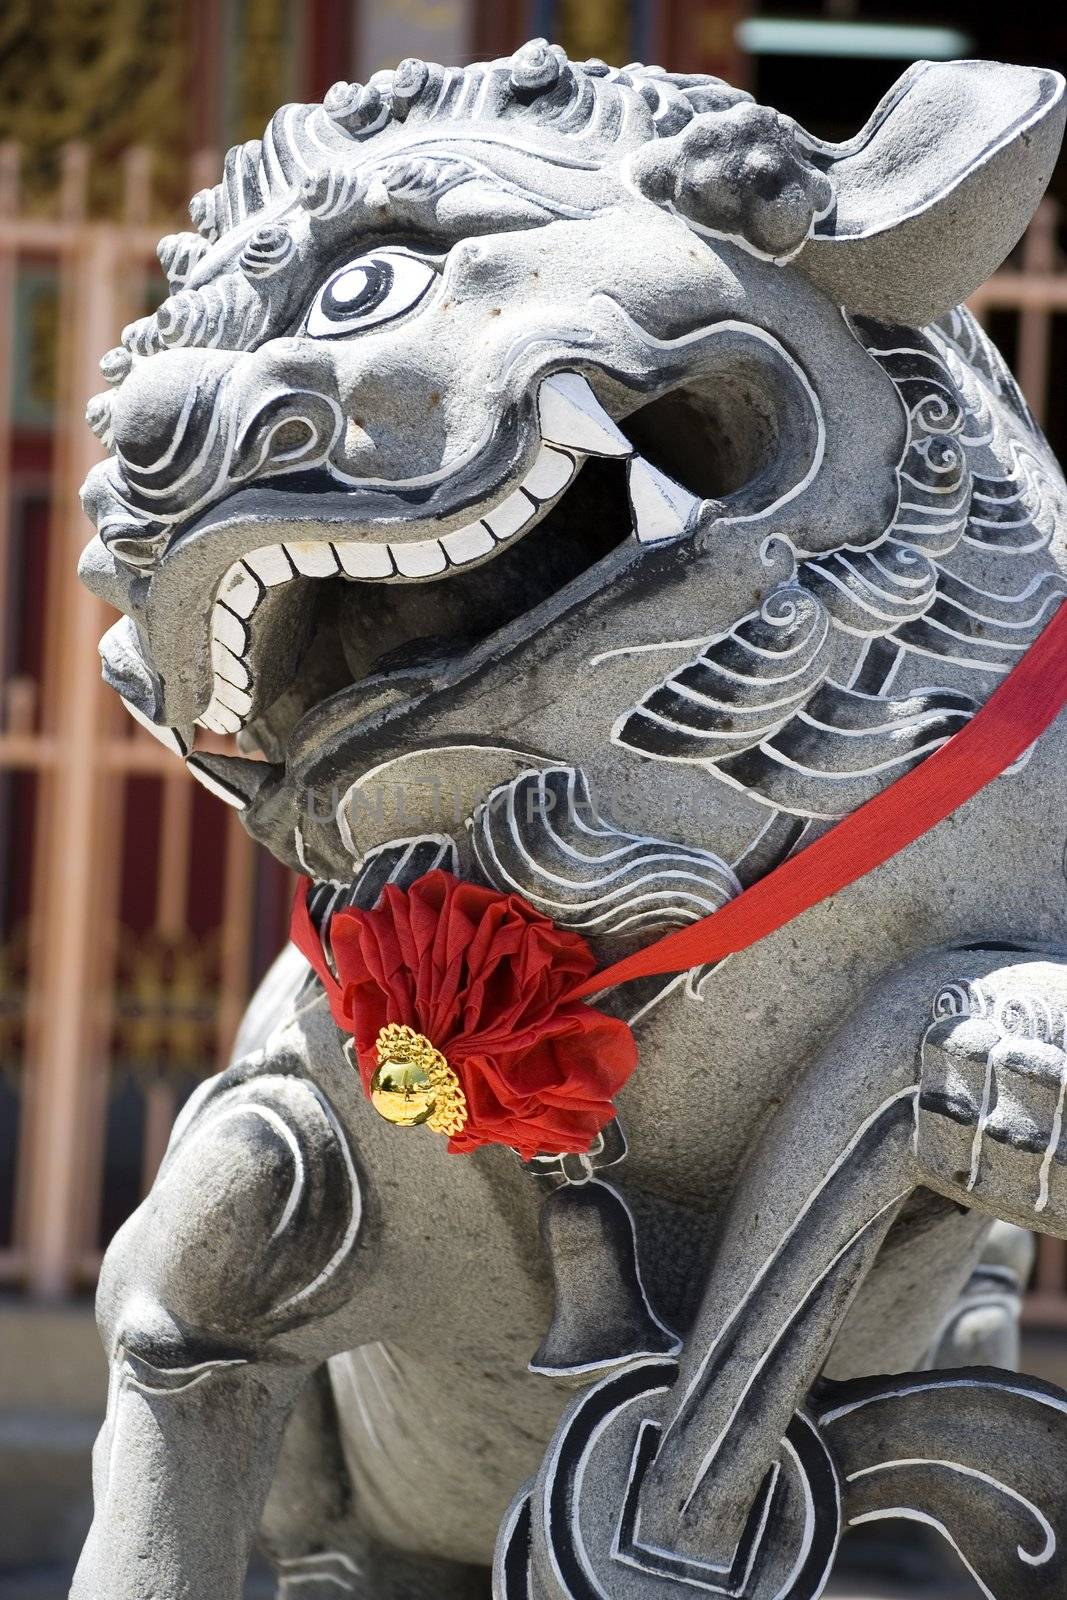 Image of a Chinese temple stone lion guardian in Malaysia.